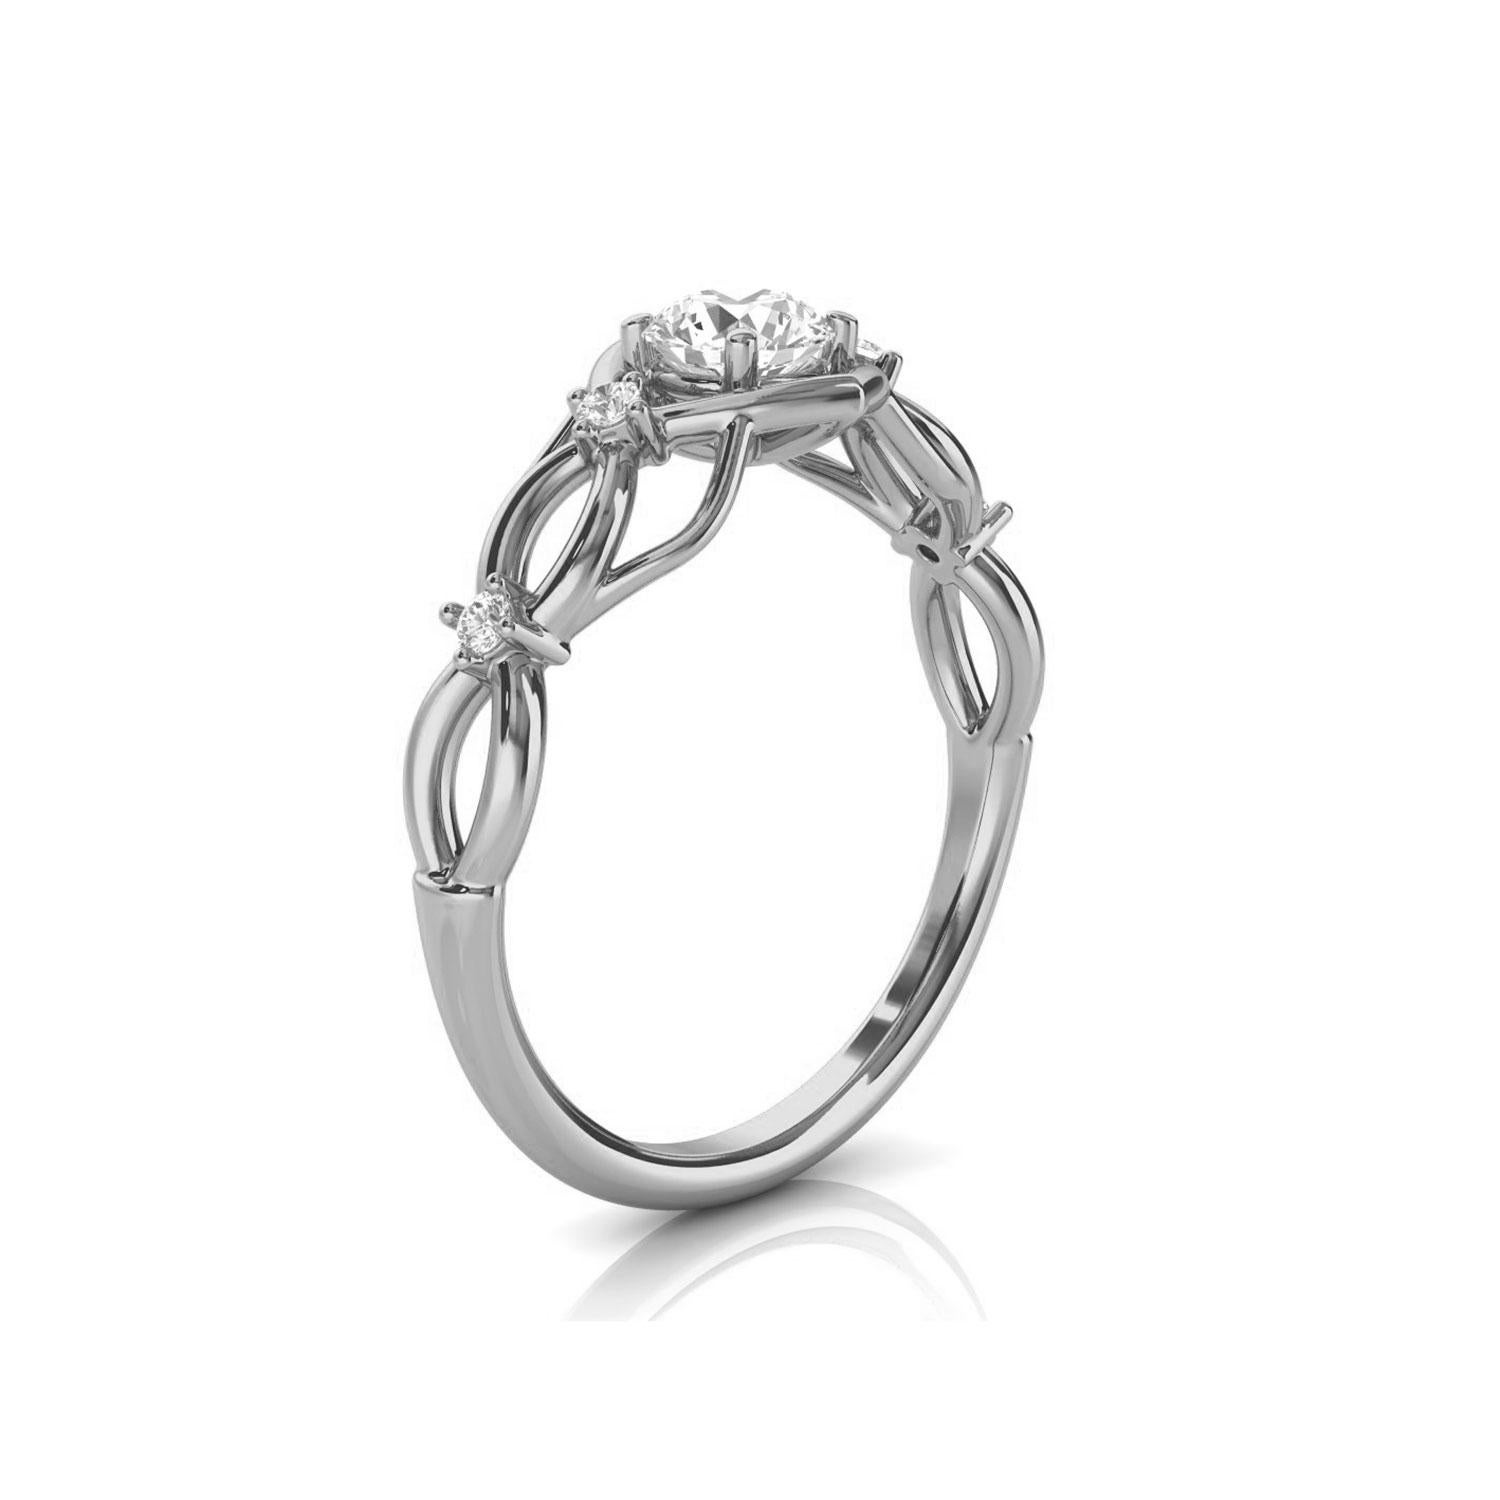 This organically designed ring features a 4.5 mm center diamond ( 0.35 carat) prong set. Two (2) small diamond prong- set along with two layers of wavey delicate metals. We love it! Experience the difference in person!

Product details: 

Center